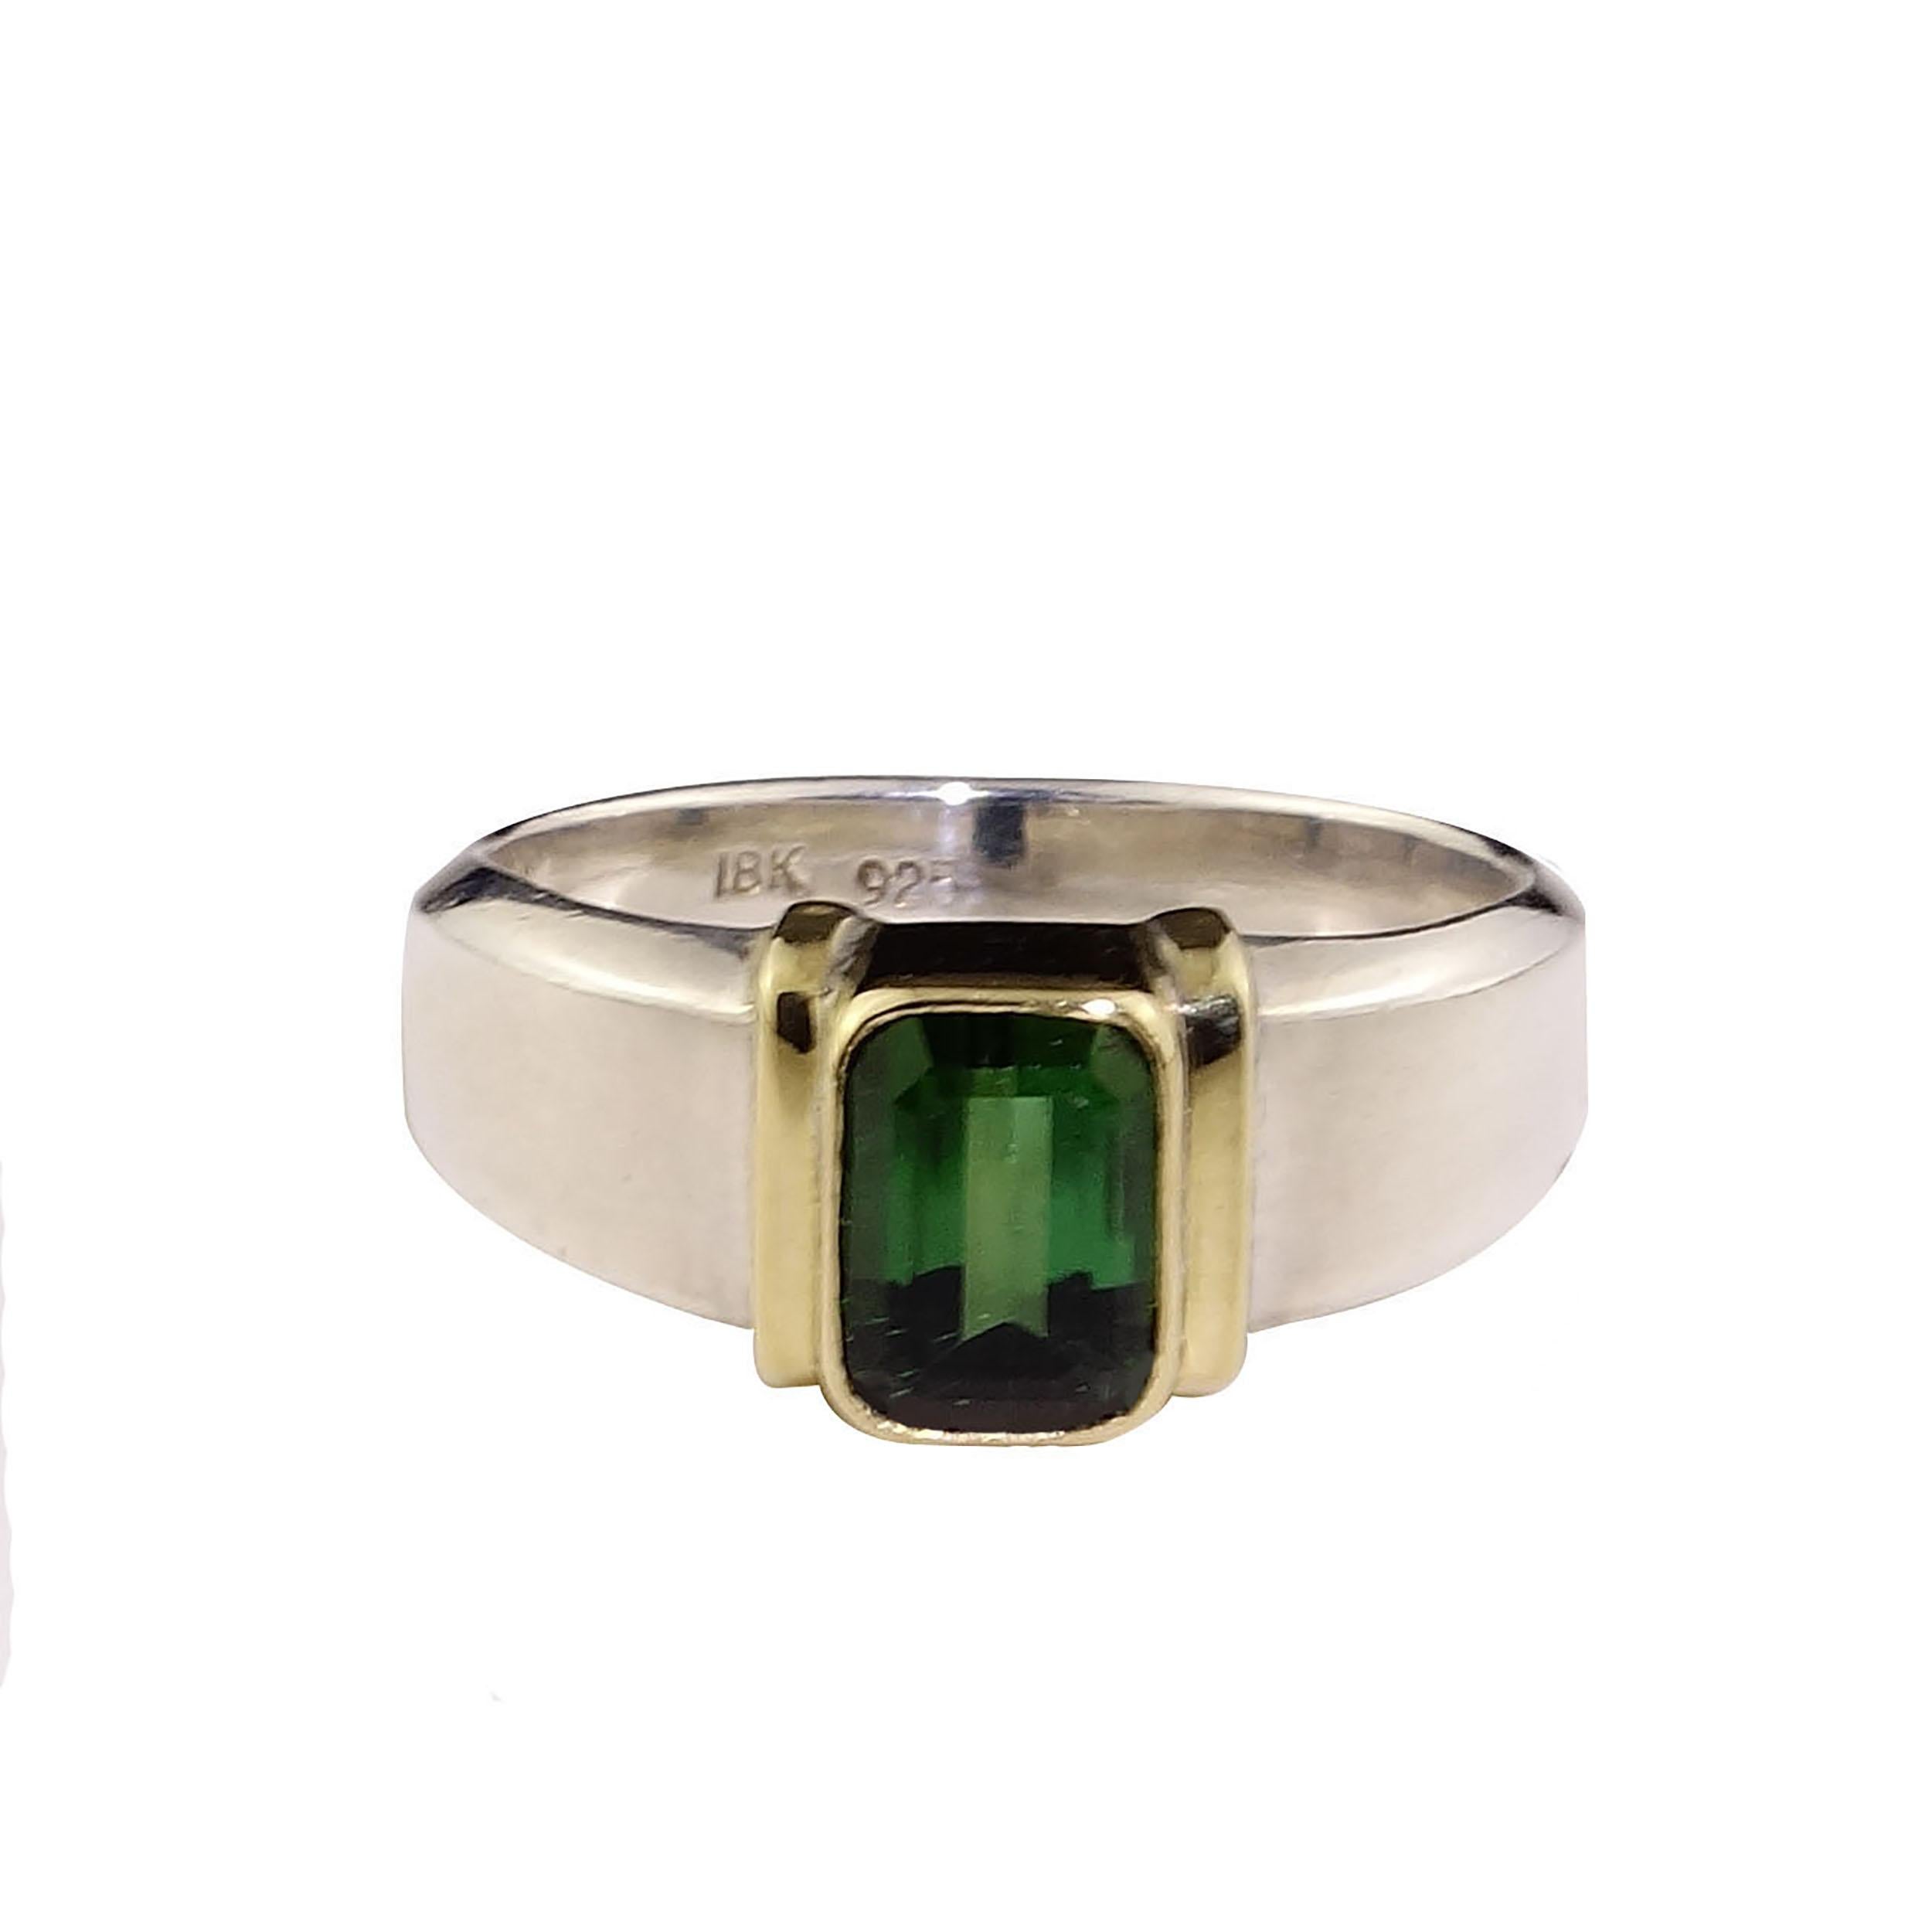 Stunning Sterling Silver Ring with Perfect Green Emerald Cut Tourmaline bezel set in 18K Yellow Gold. This is a Steven Battelle ring.  Tourmaline is the October birthstone. Tourmaline means 'a gem of the rainbow' and this is 'gem' of a ring! 